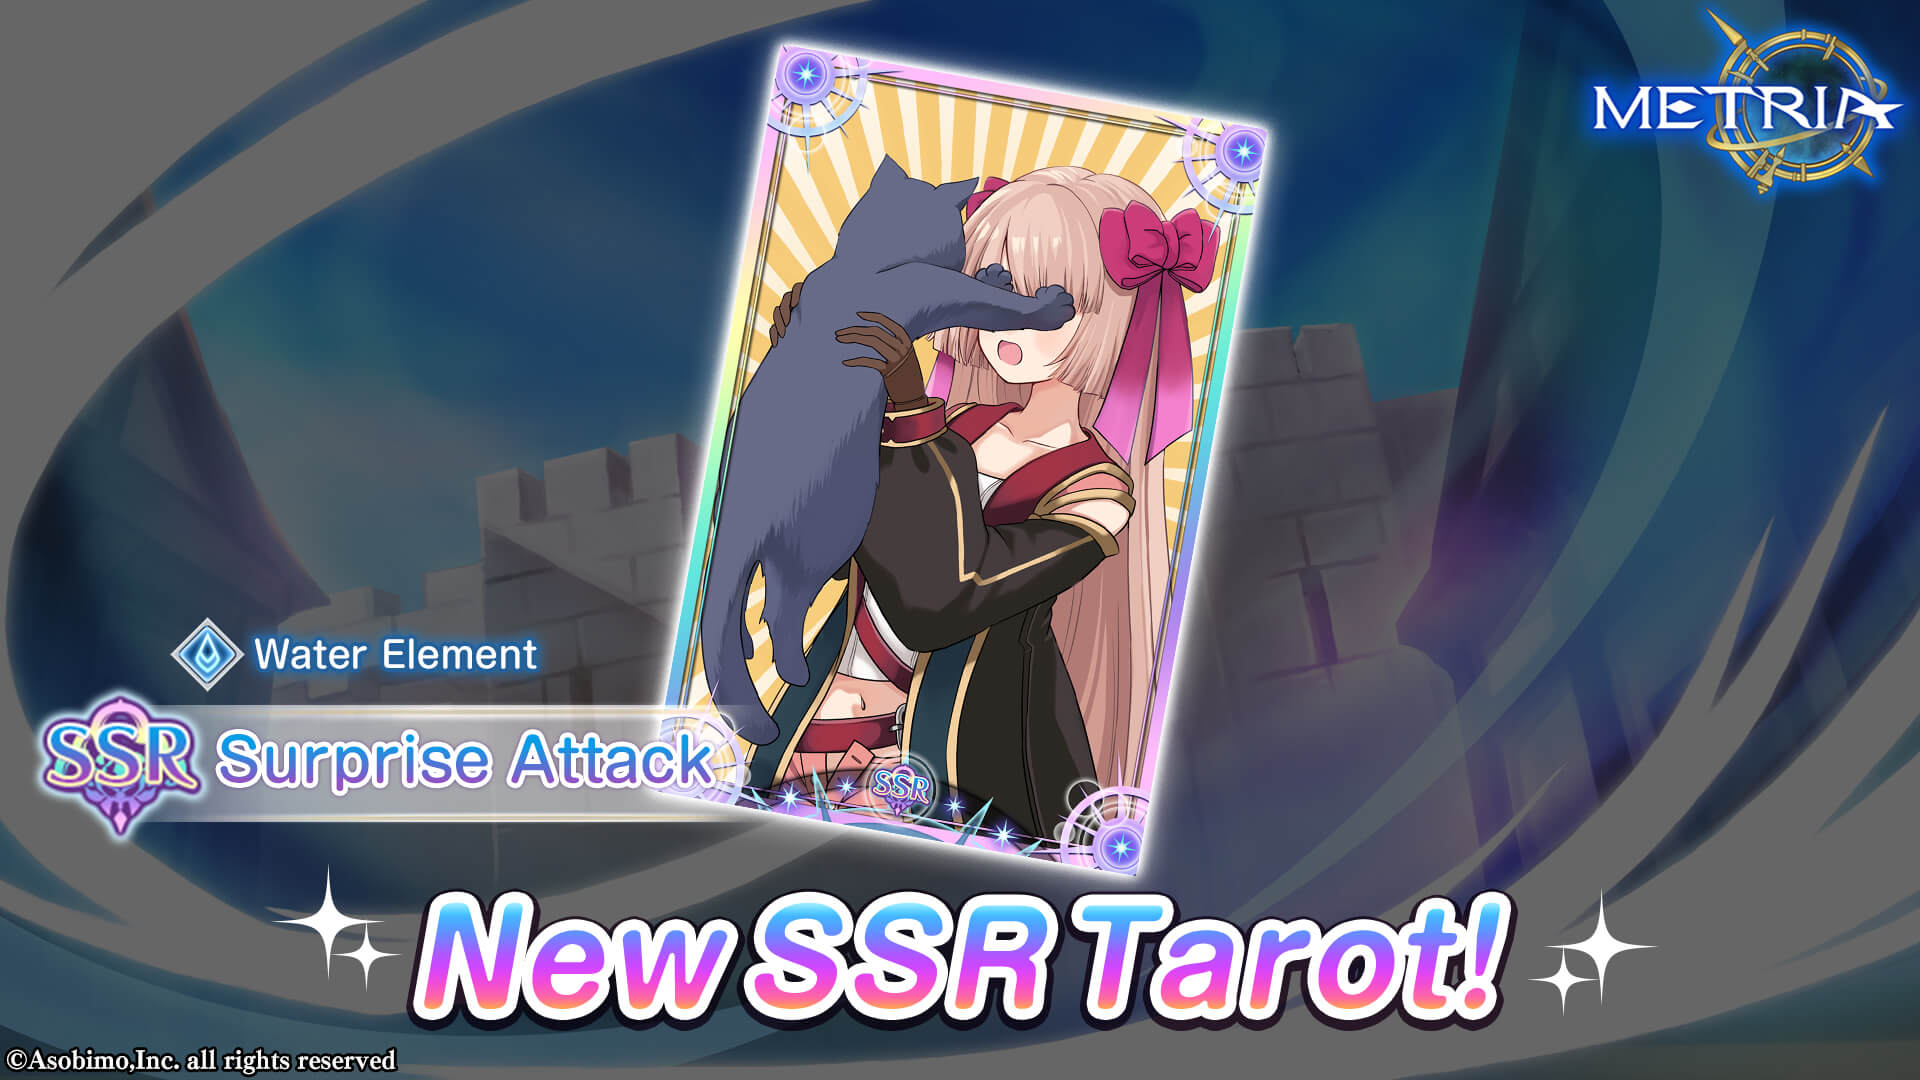 New SSR Tarot: "Surprise Attack" Coming Soon!